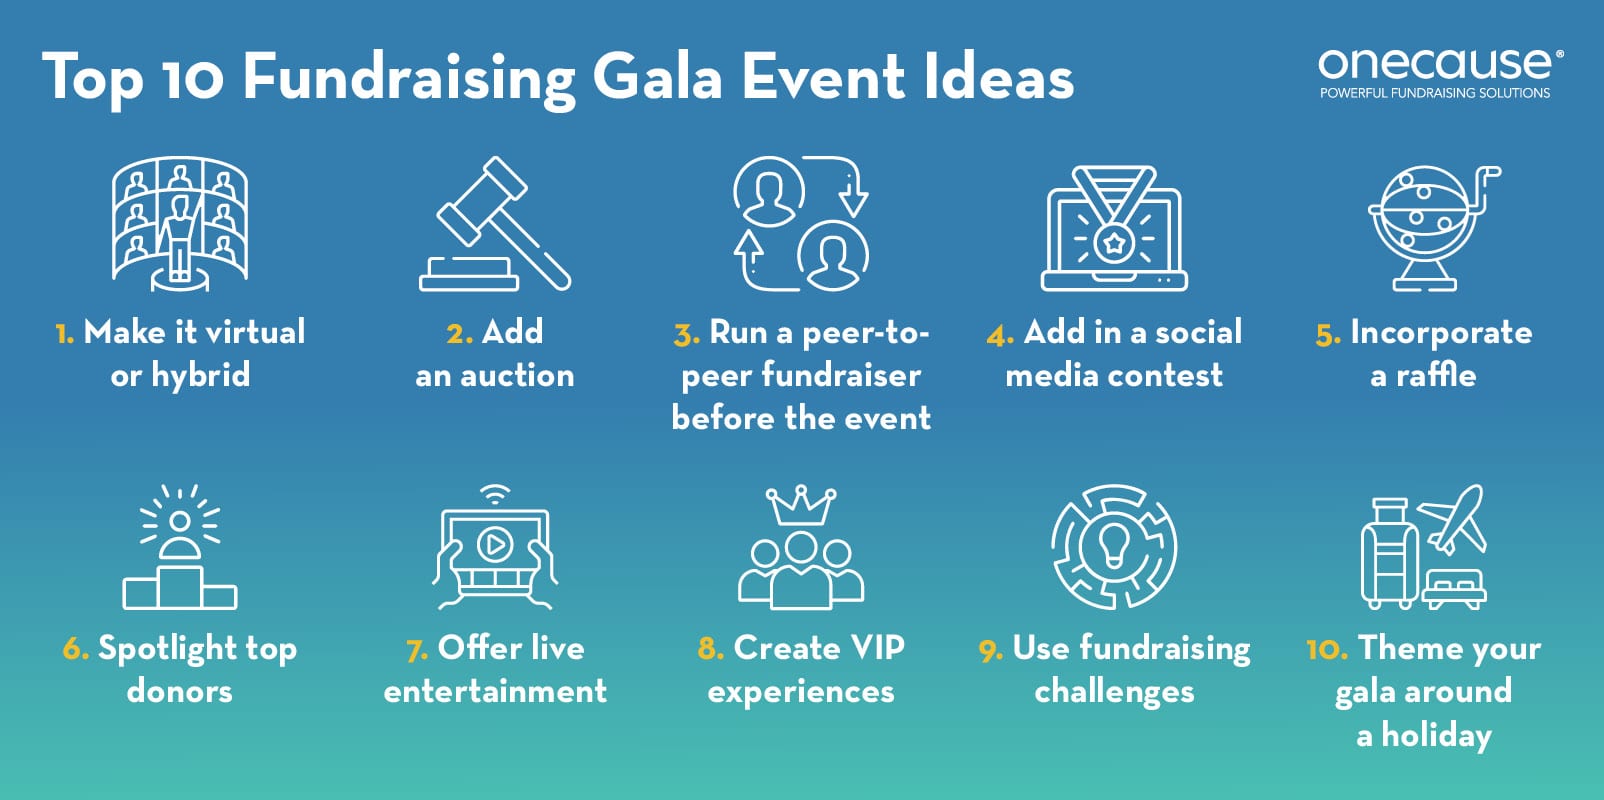 Think outside the box and take your fundraising gala to the next level with these creative ideas.